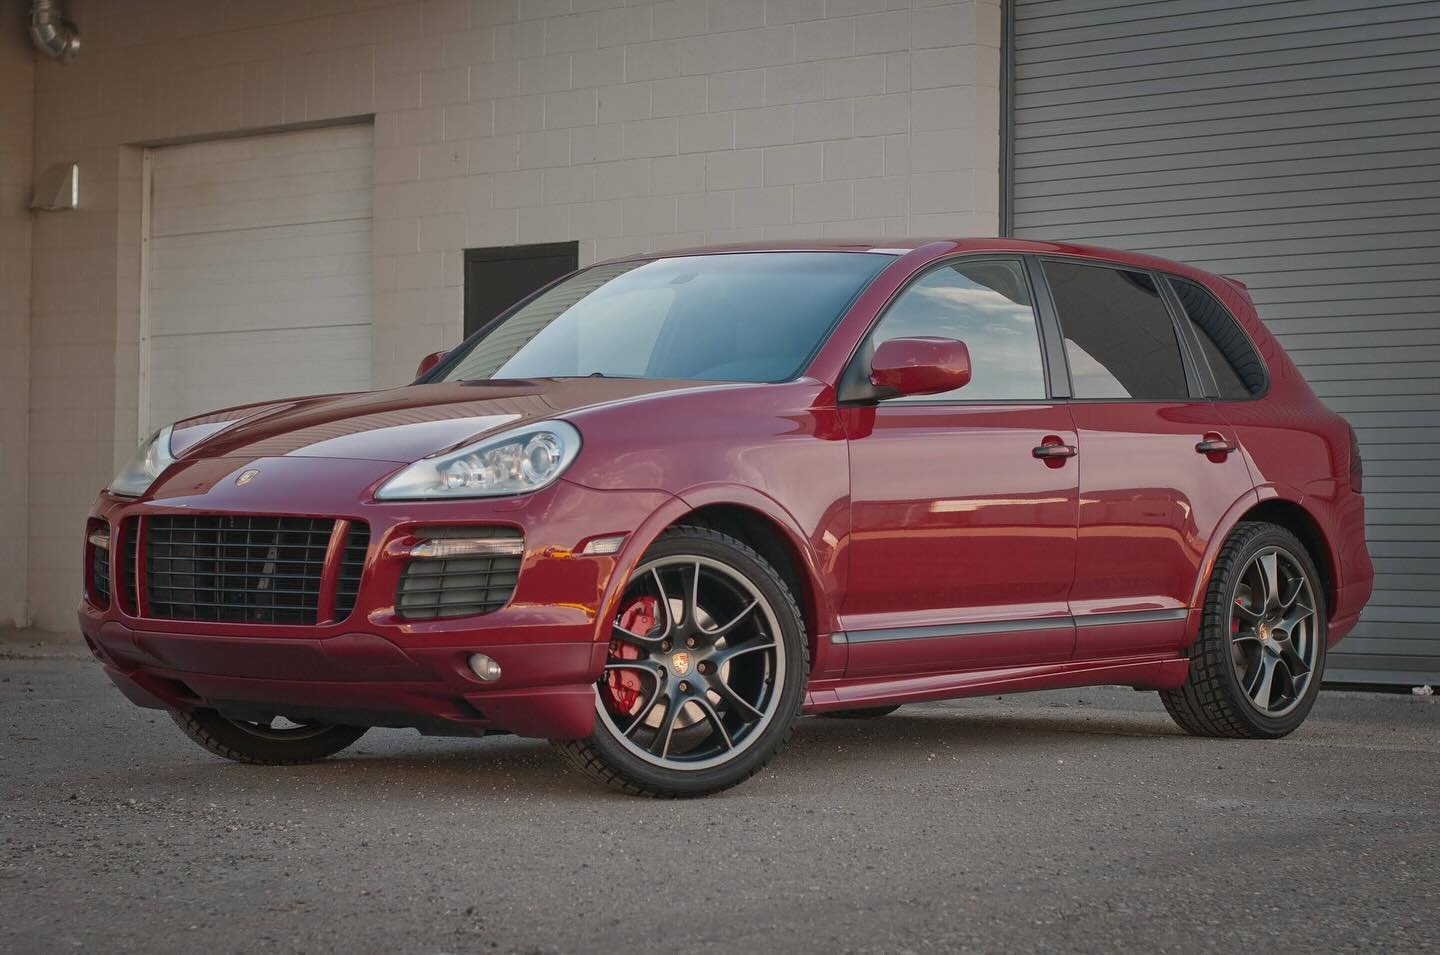 This &lsquo;08 Cayenne GTS, in arguably the most special color &ldquo;GTS Red&rdquo;, was bought direct from dealer auctions in Japan and imported to Canada. 

Many unique features available only in the GTS model make them highly desirable. 

We thin